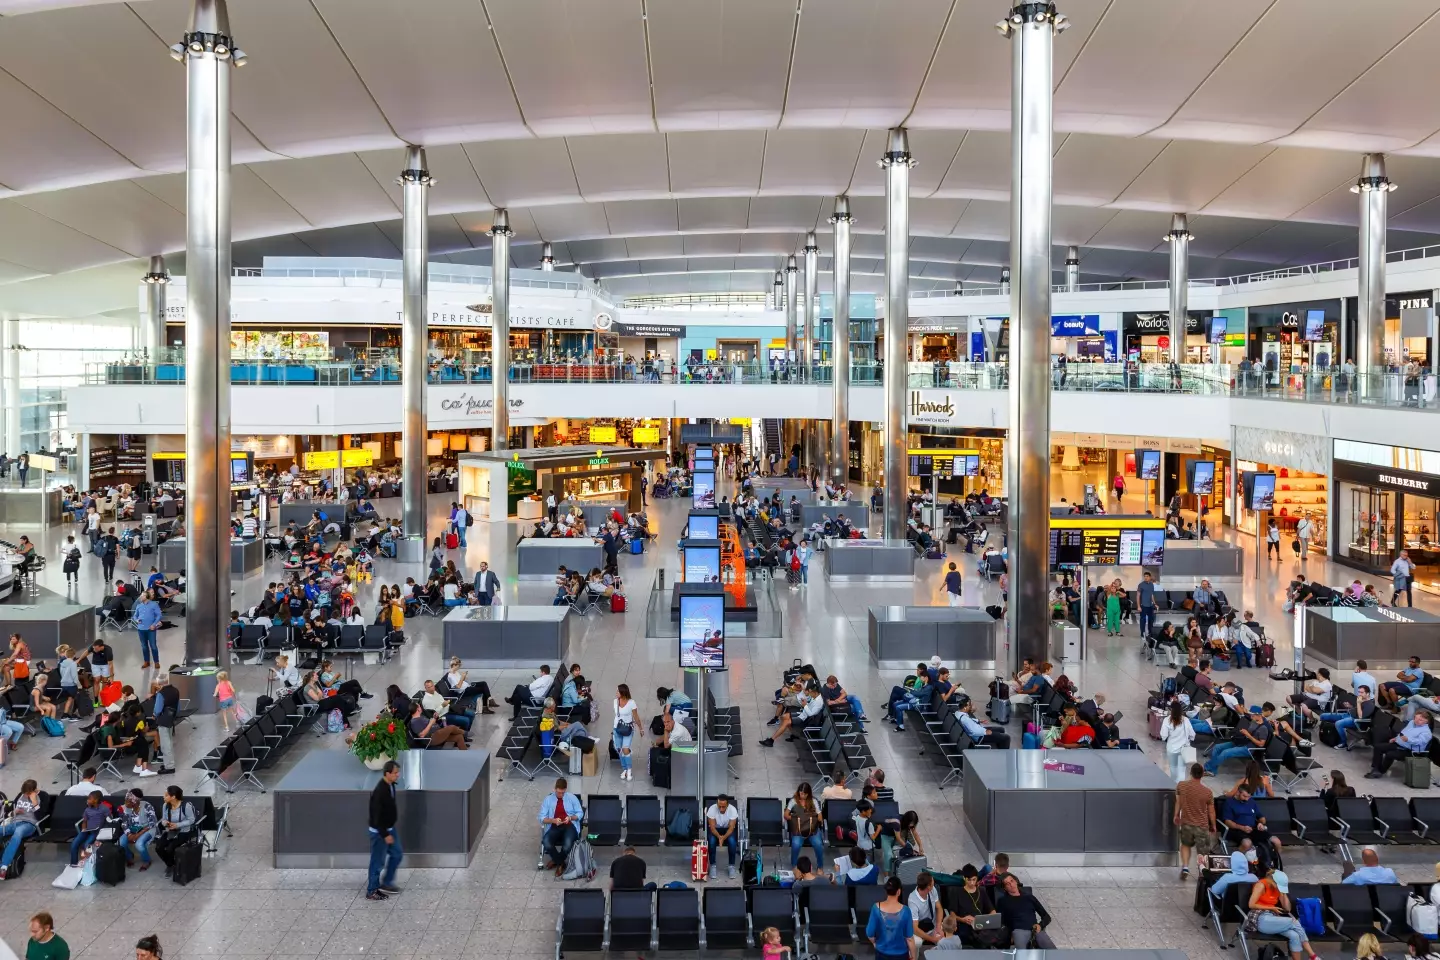 Heathrow airport is set to introduce a cap on the number of passengers wanting to travel this summer.